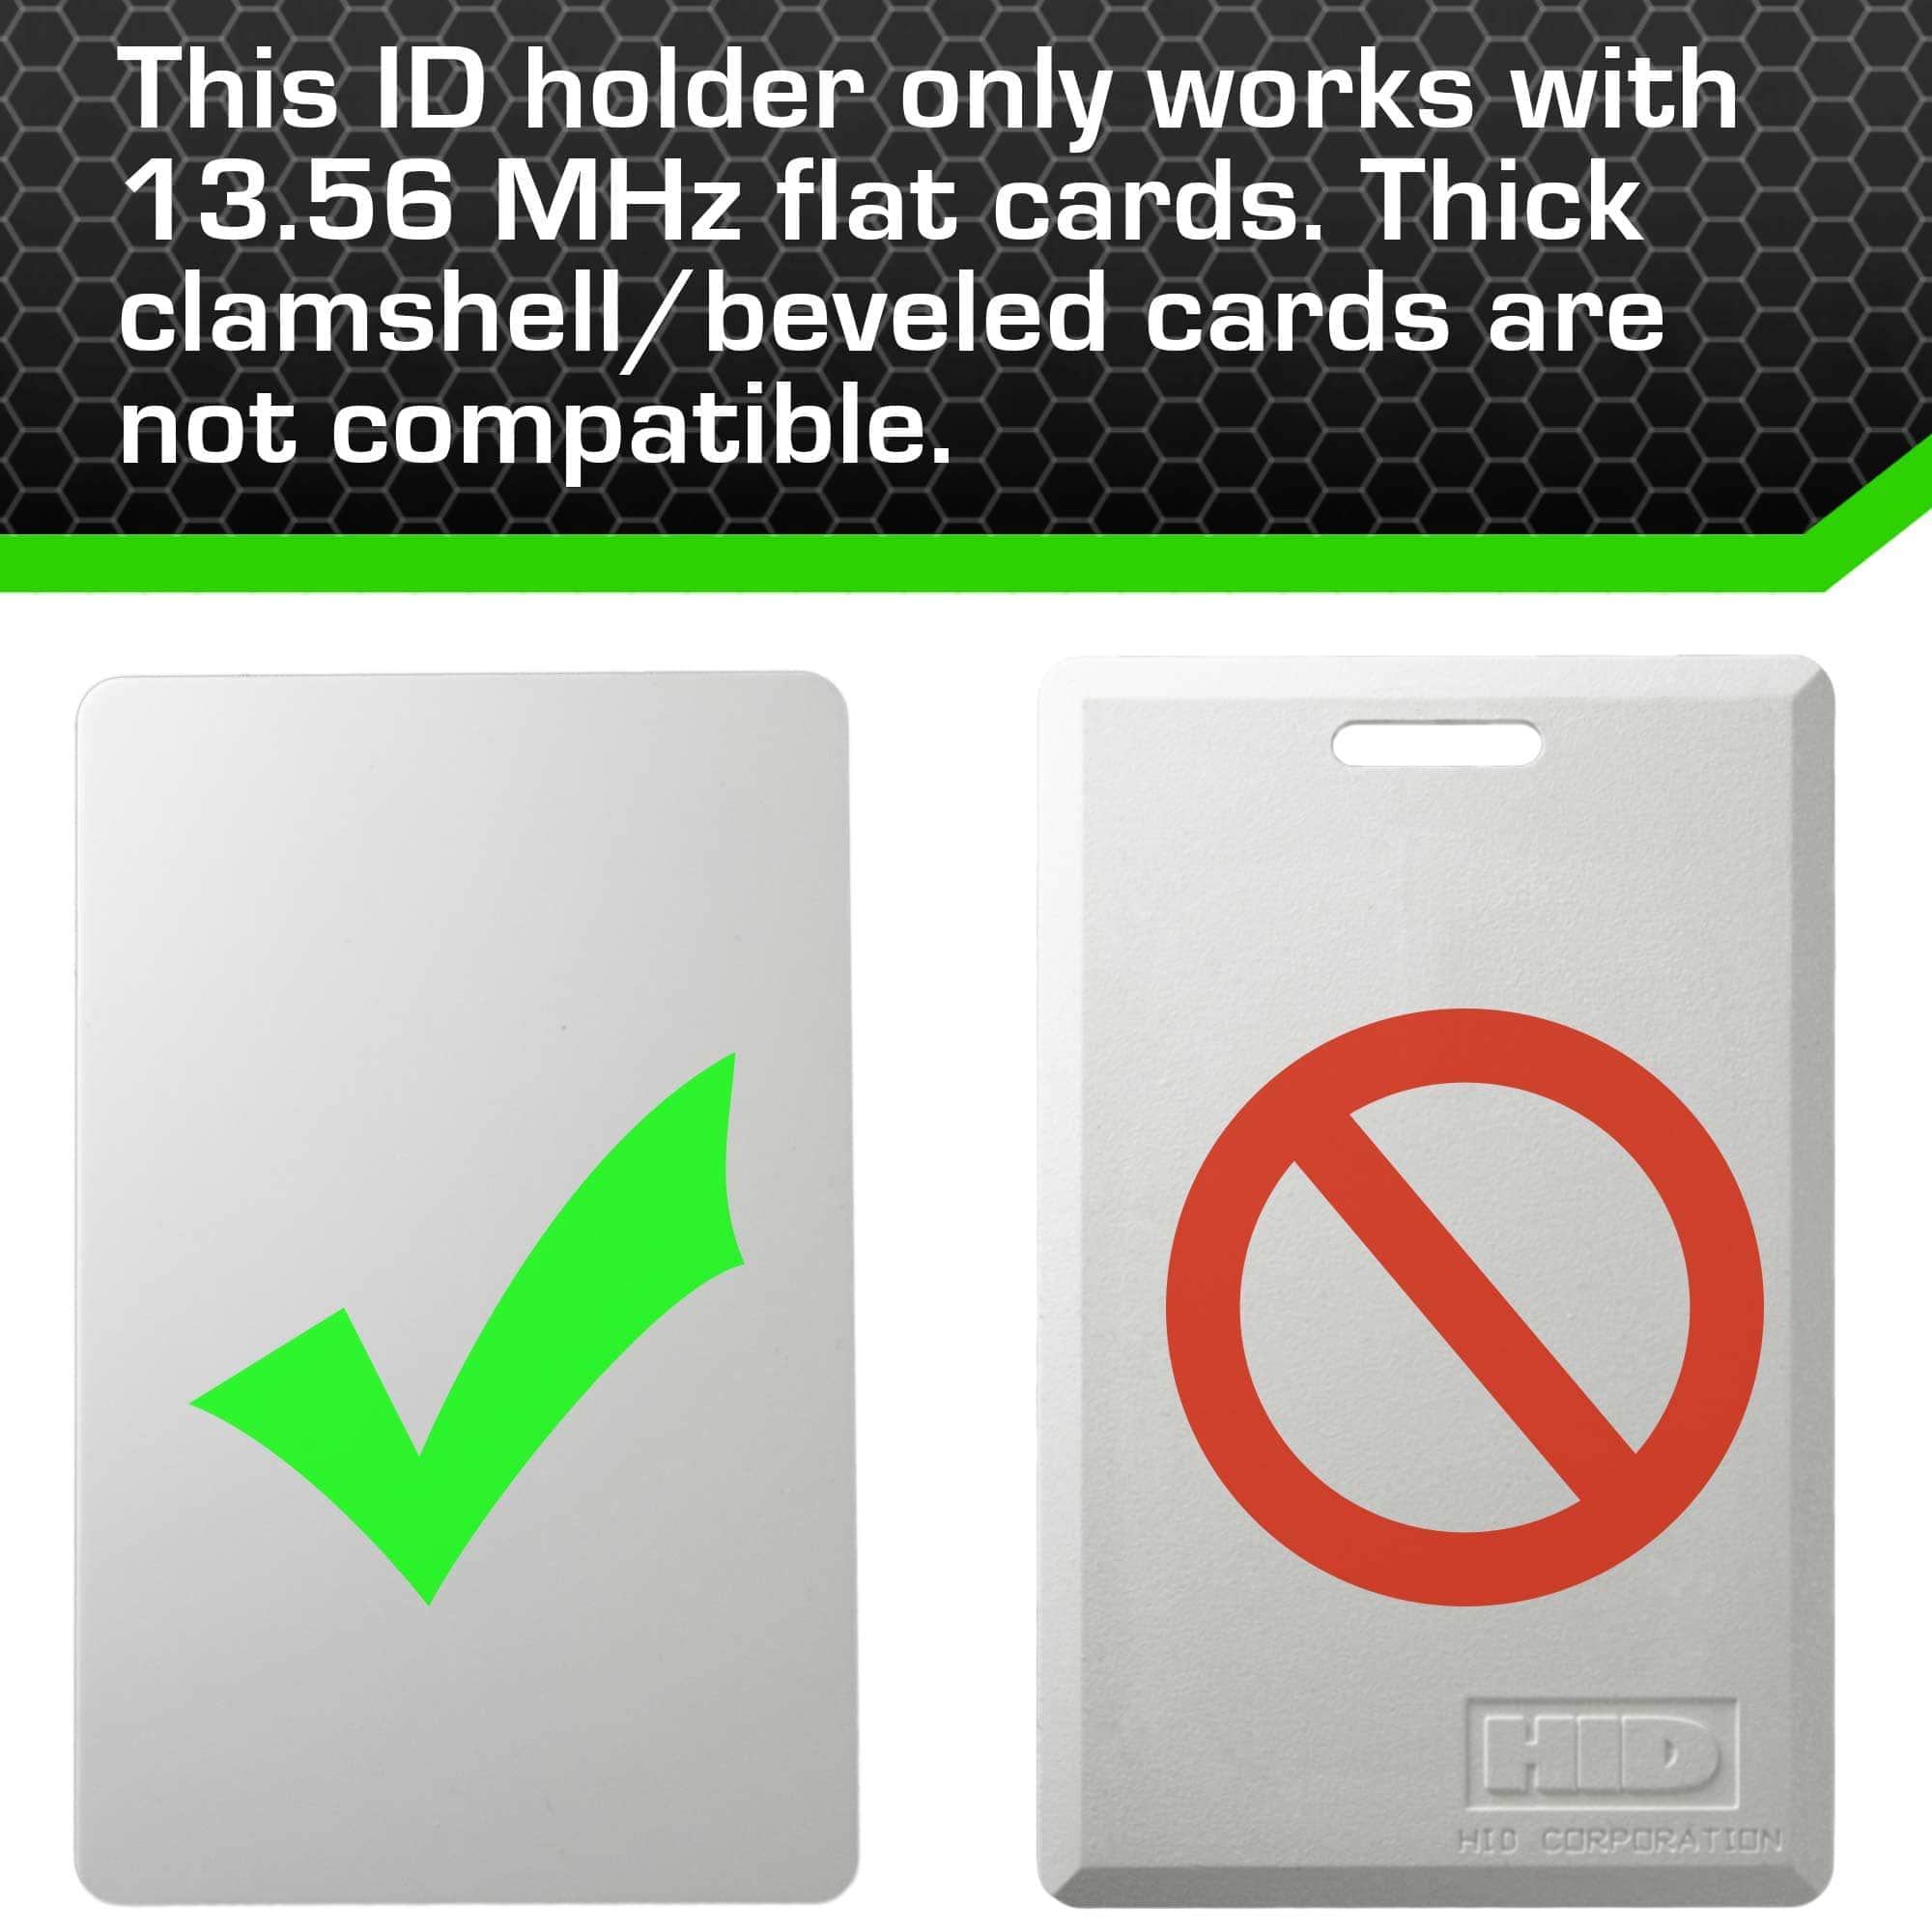 100 Pack - Vertical Half Card Badge Holder for Smart Cards (CHIP INSERT)  PIV Common Access and Credit Cards - Crystal Clear Hard Polycarbonate  Plastic - Heavy Duty Grippers Clamp Tight - Specialist ID 